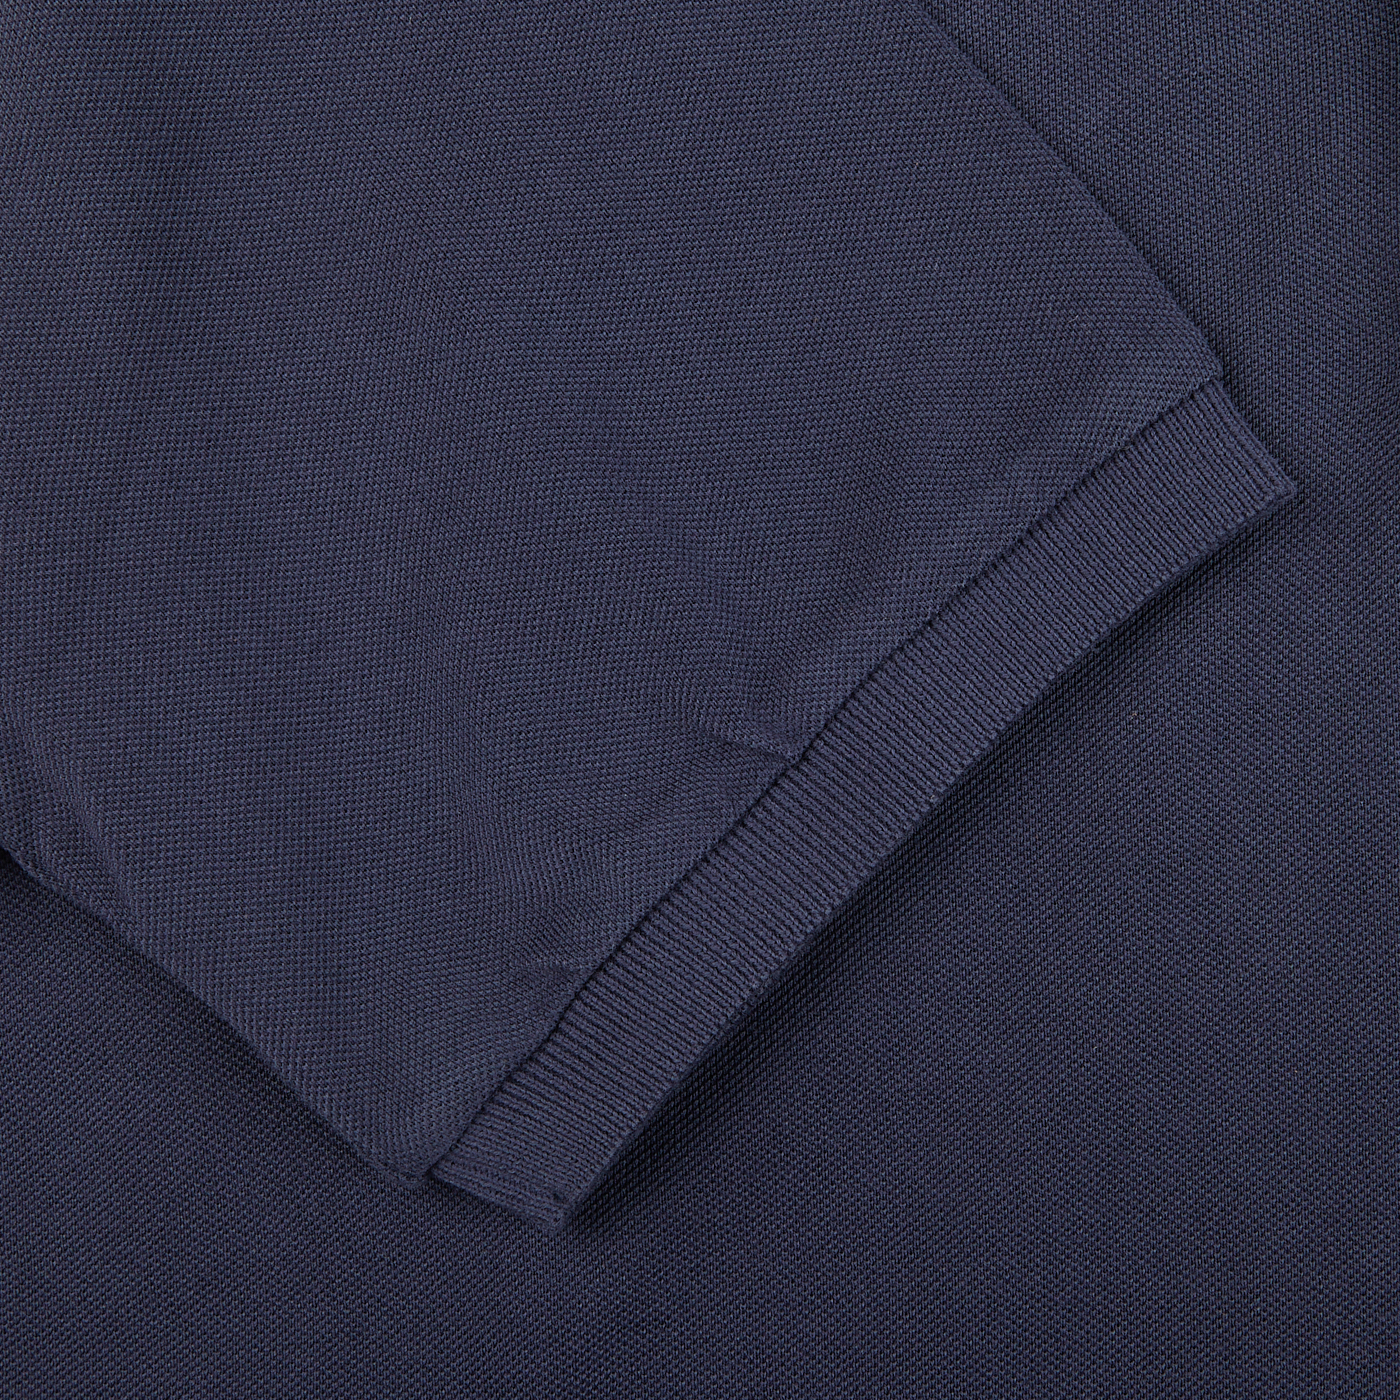 A close up of a navy **Fedeli Washed Navy Cotton Pique Polo Shirt**.